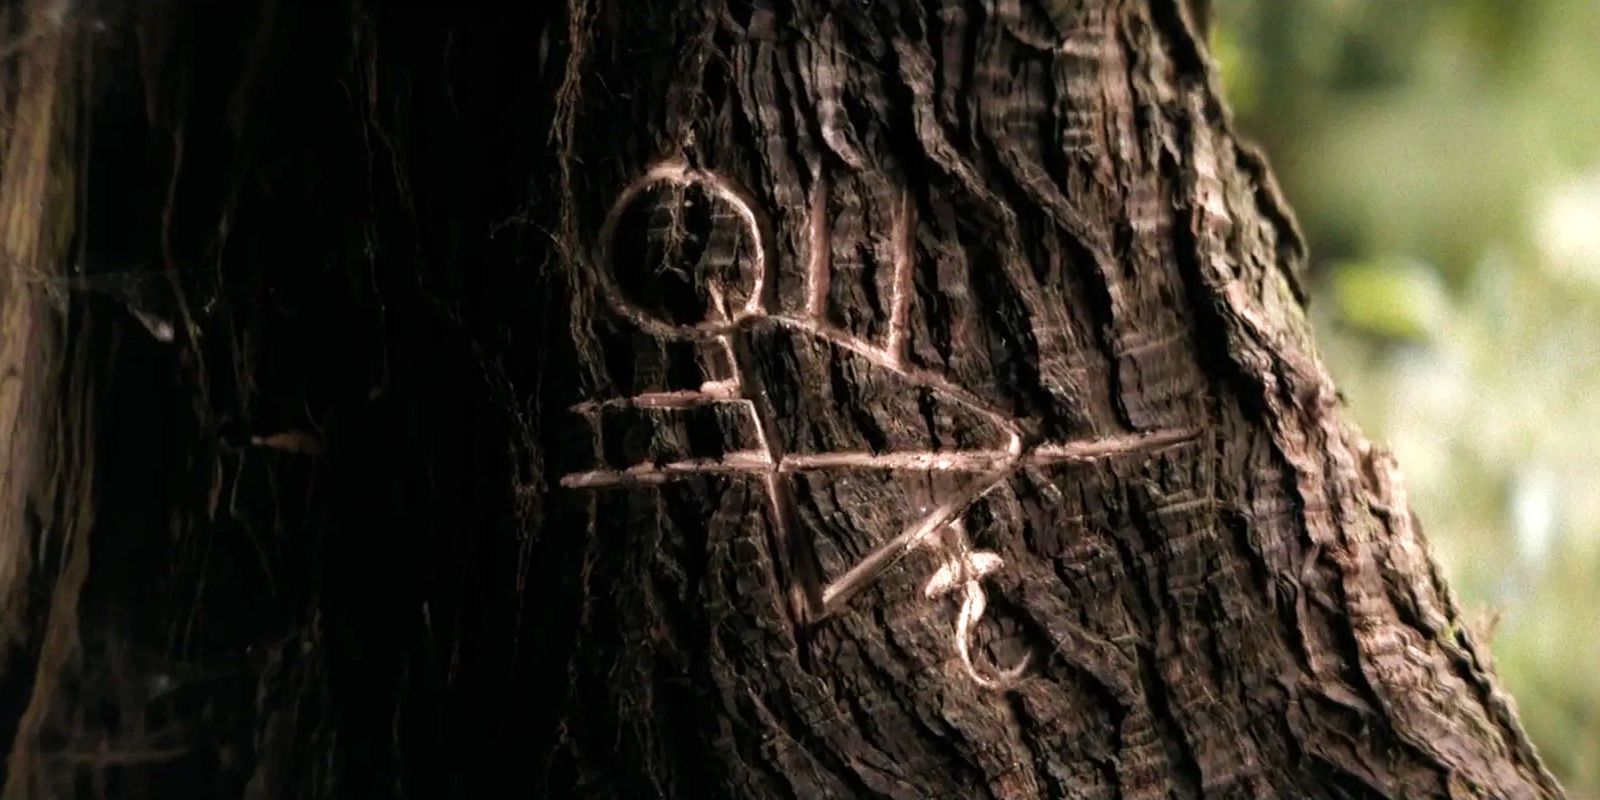 Yellowjackets Symbol in a tree Meaning